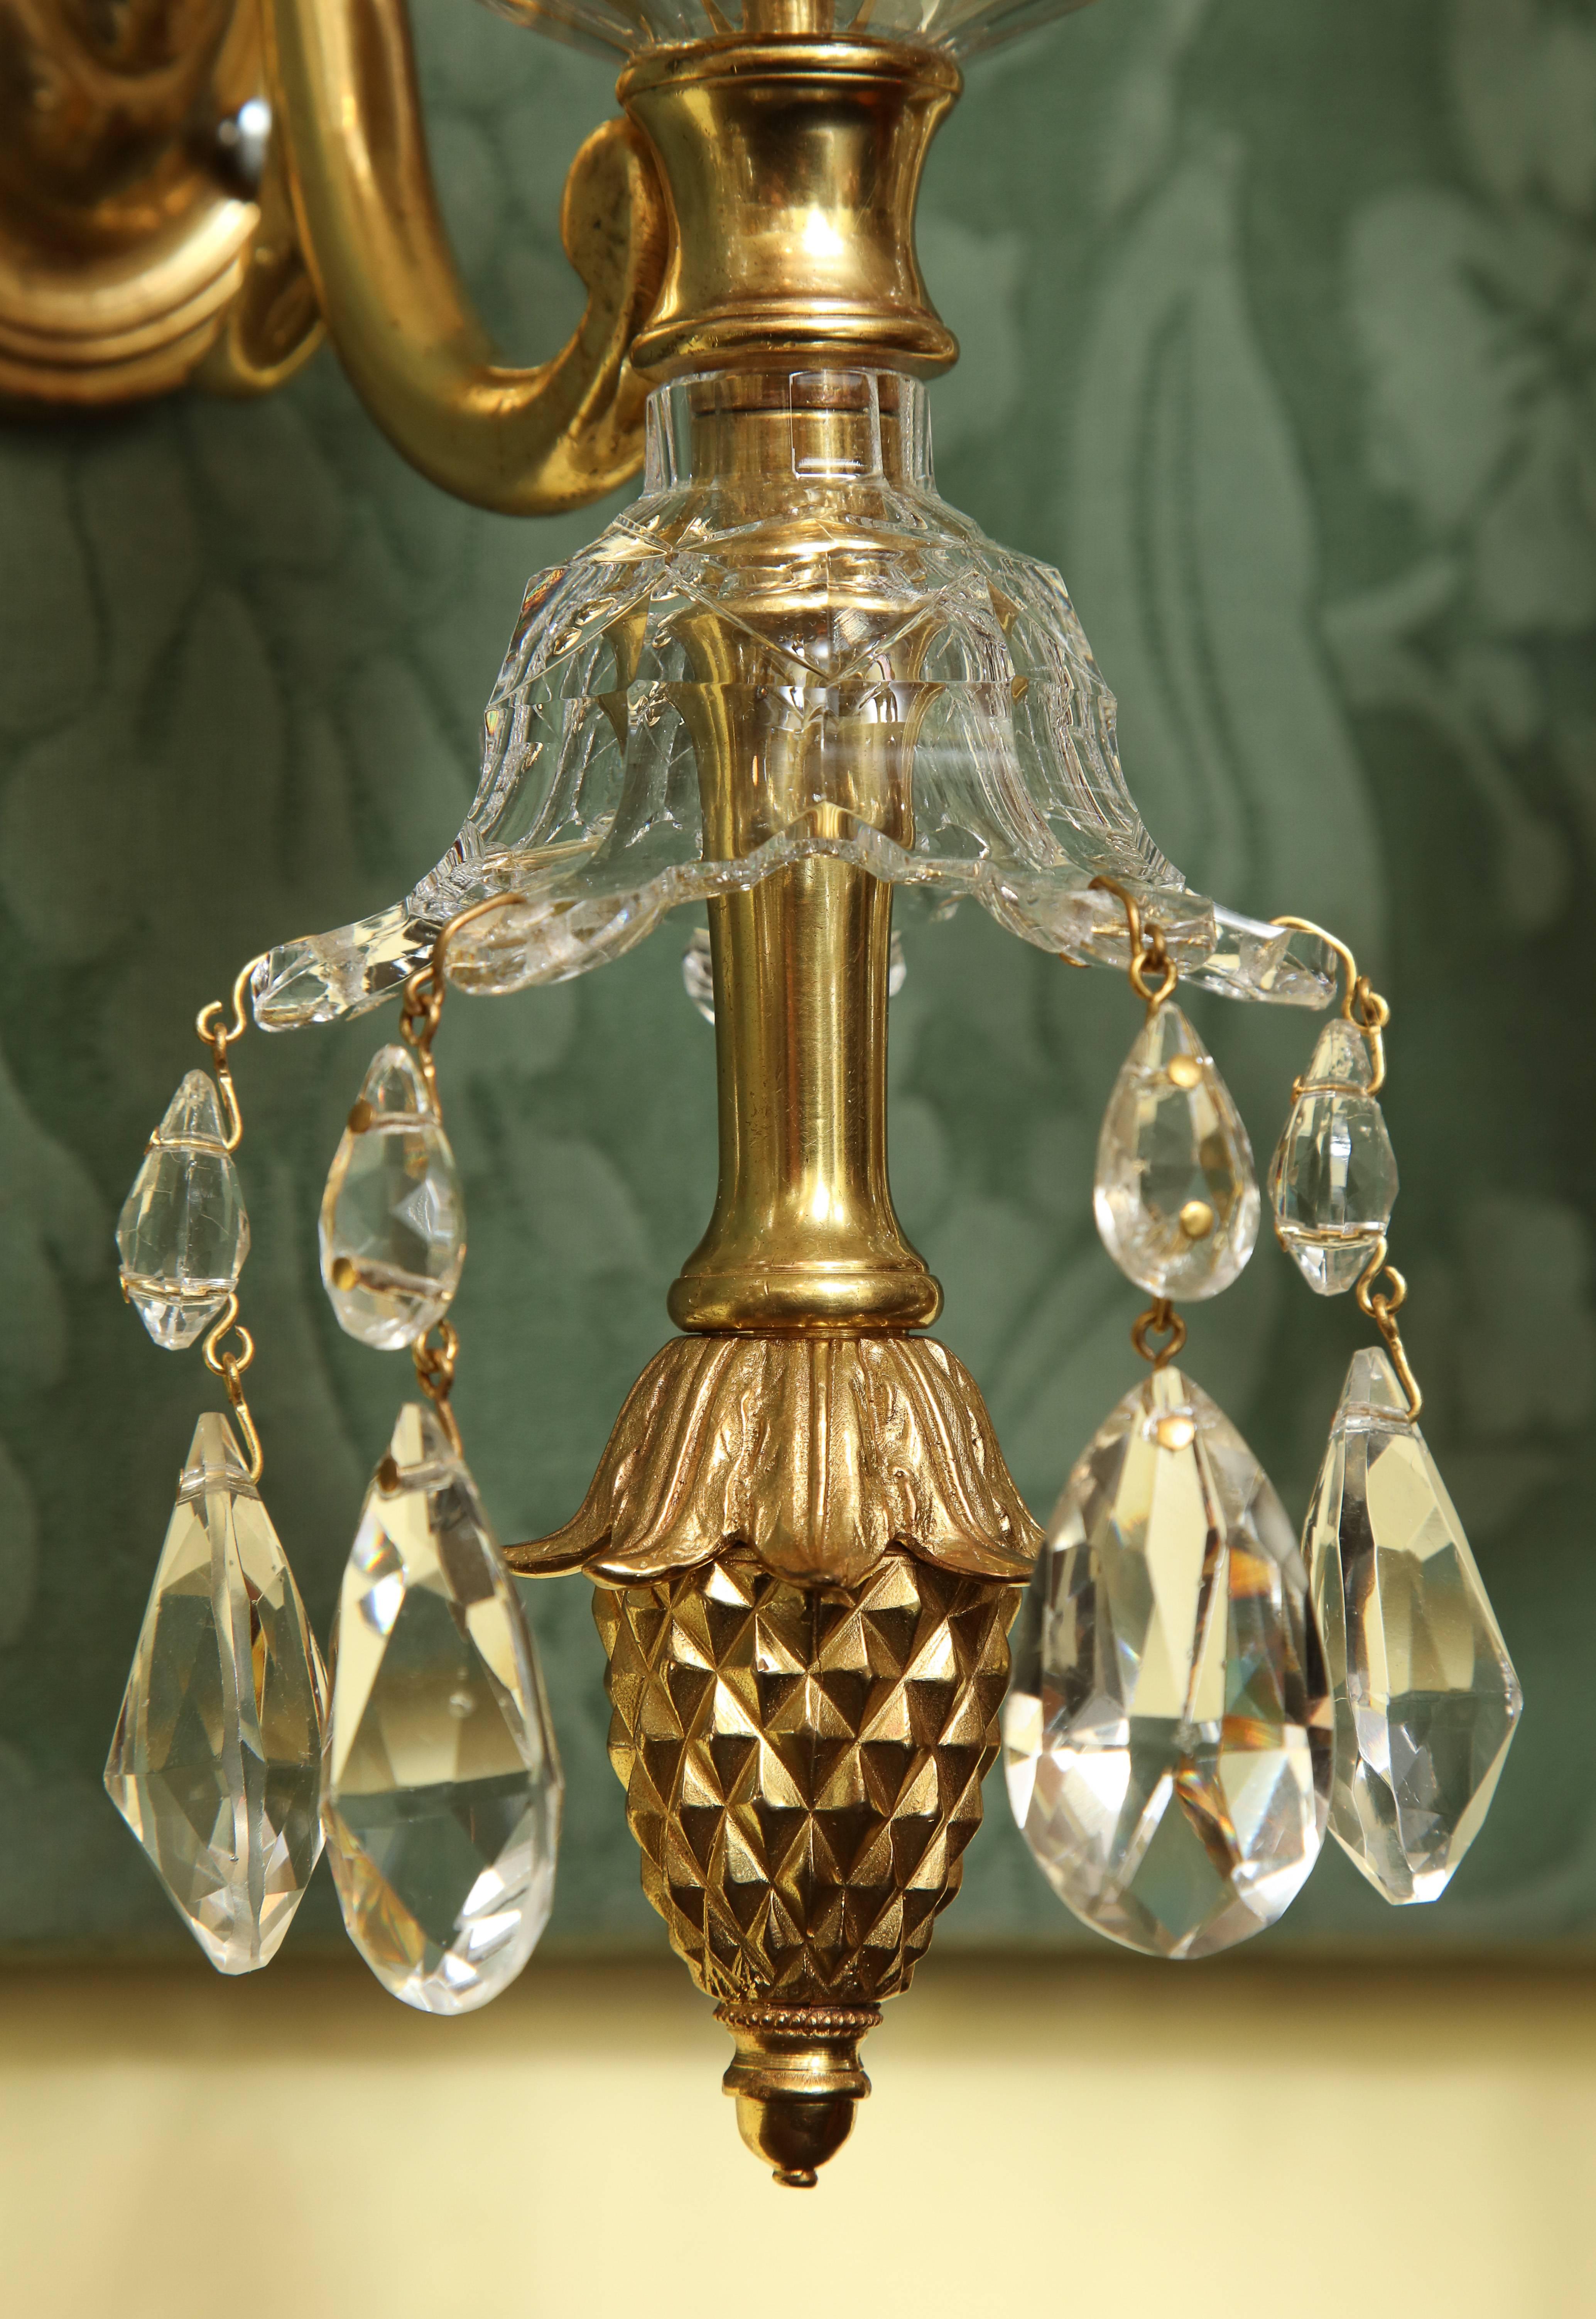 Pair of Adam Cut Crystal and Ormolu Two-Light Wall Sconces, English, circa 1775 For Sale 1